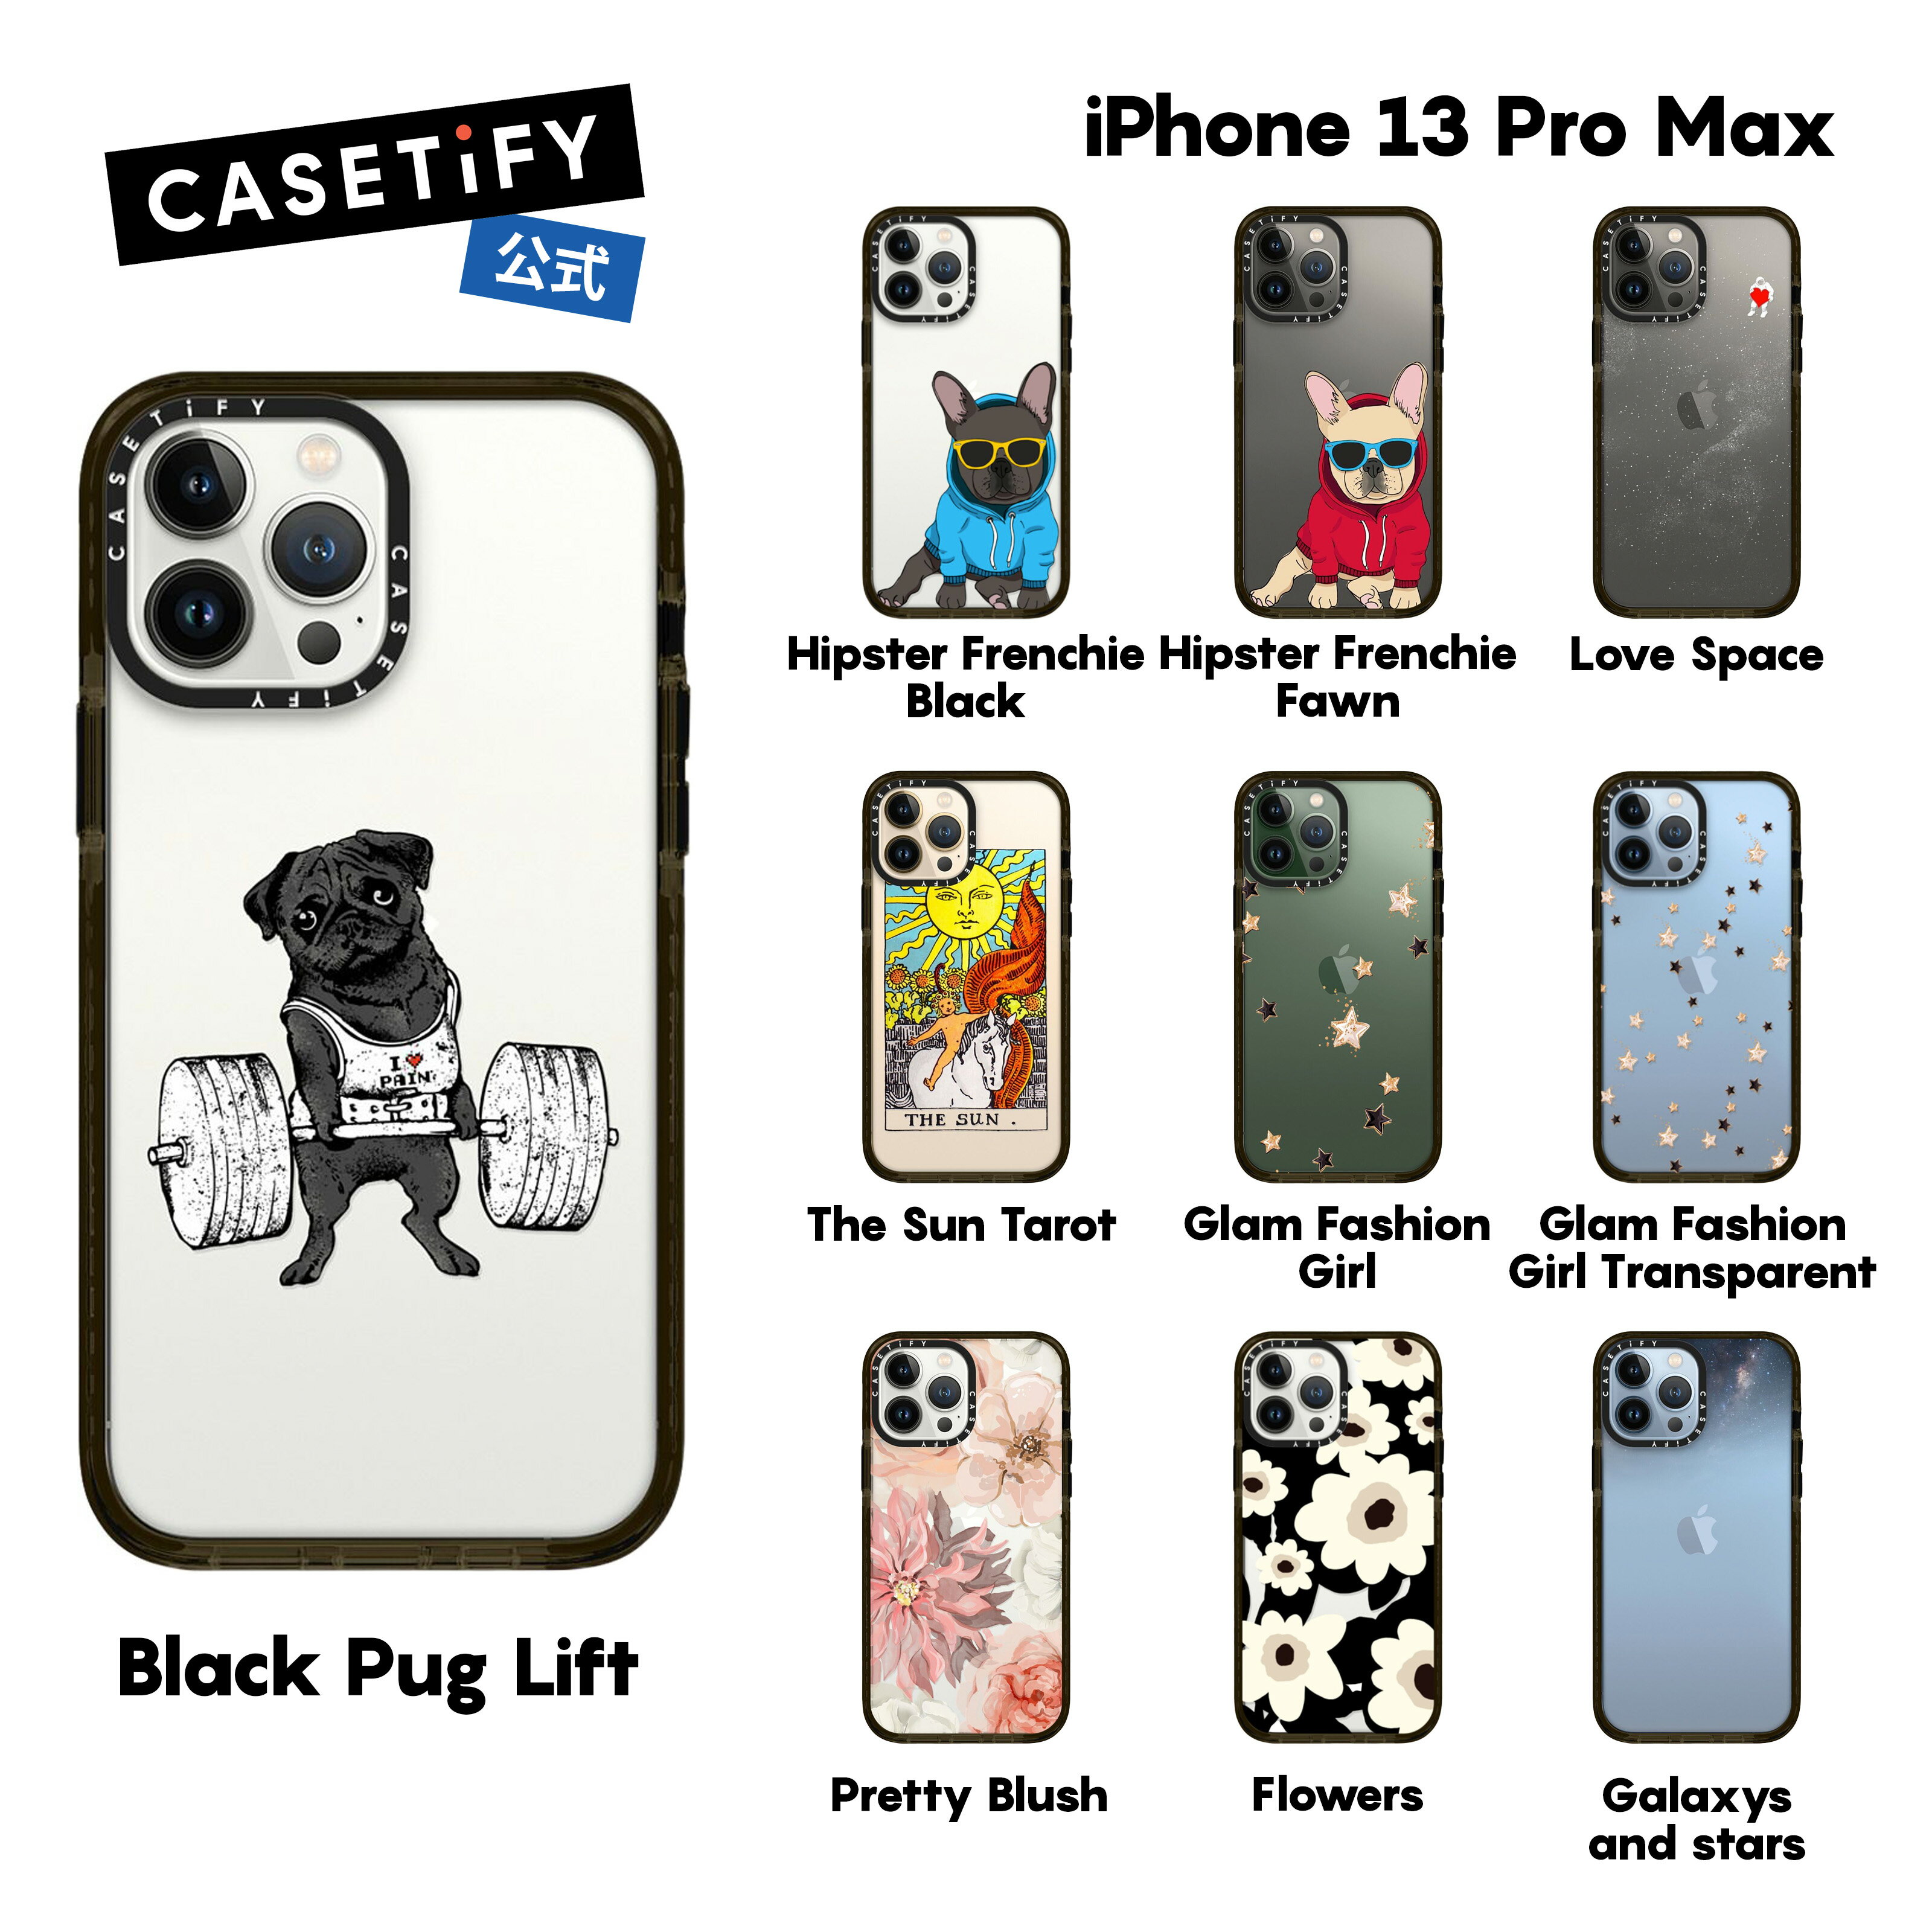 CASETiFY iPhone 13ProMax インパクトケース クリア ブラック クリア フロスト Hipster Frenchie Black Love Space Flowers Black Pug Lift PP-0008 iPhoneケース iPhone 13ProMax 耐衝撃 保護ケース 透明